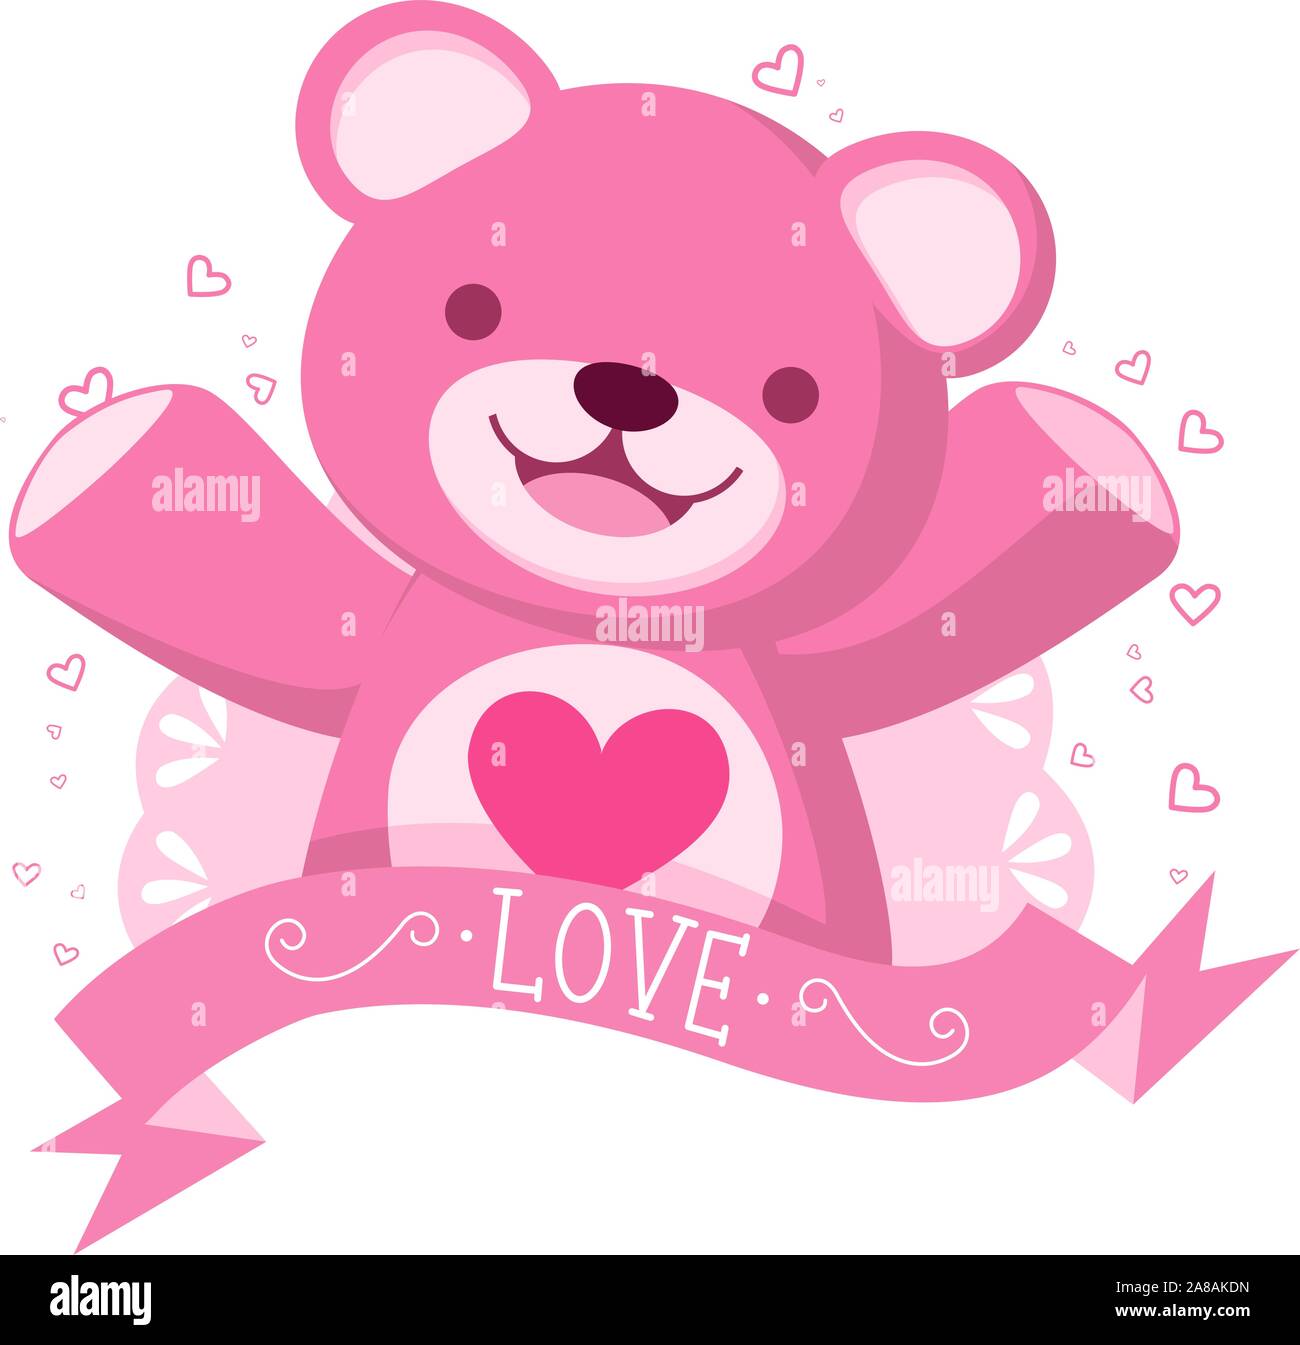 Pink Teddy bear with love banner vector illustration Stock Vector